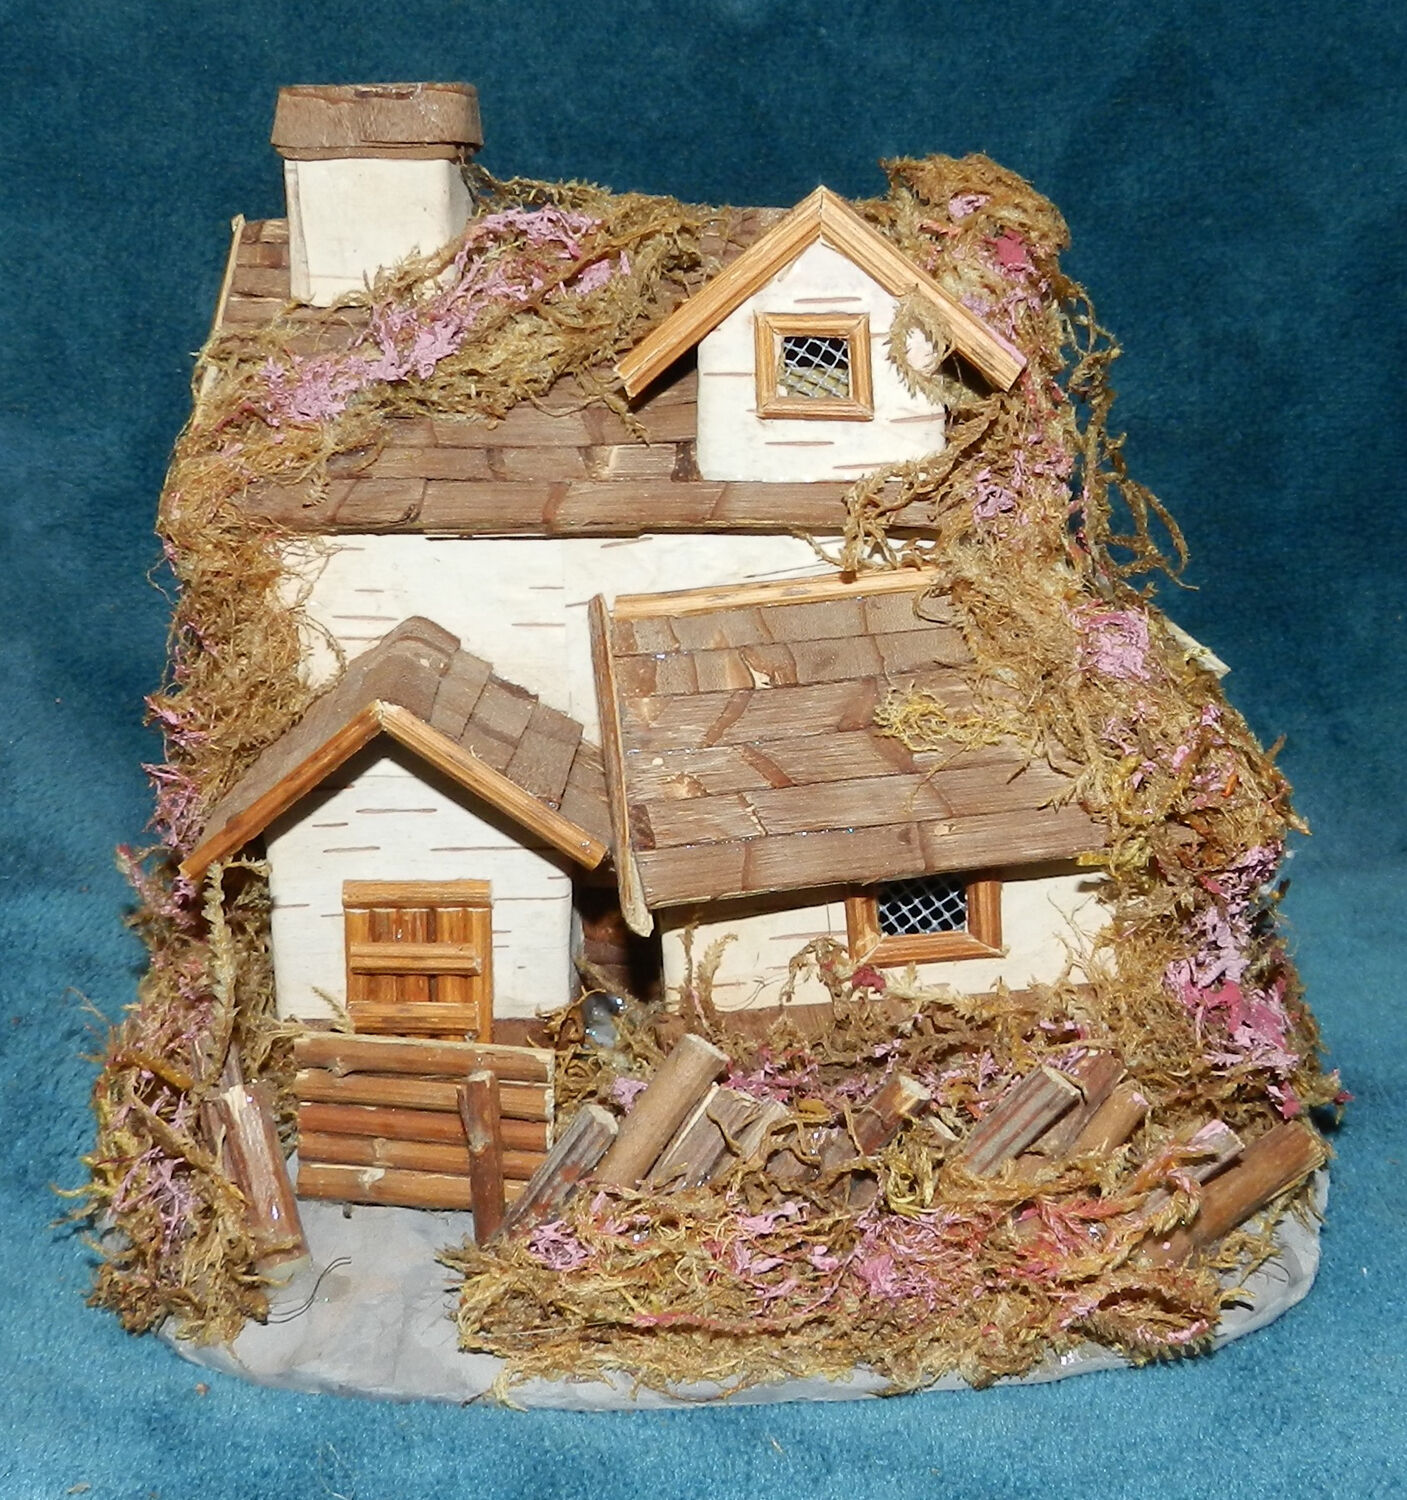 FANTASTIC MINIATURE HOUSE MADE FROM BARK AND OTHER NATURAL ITEMS 4